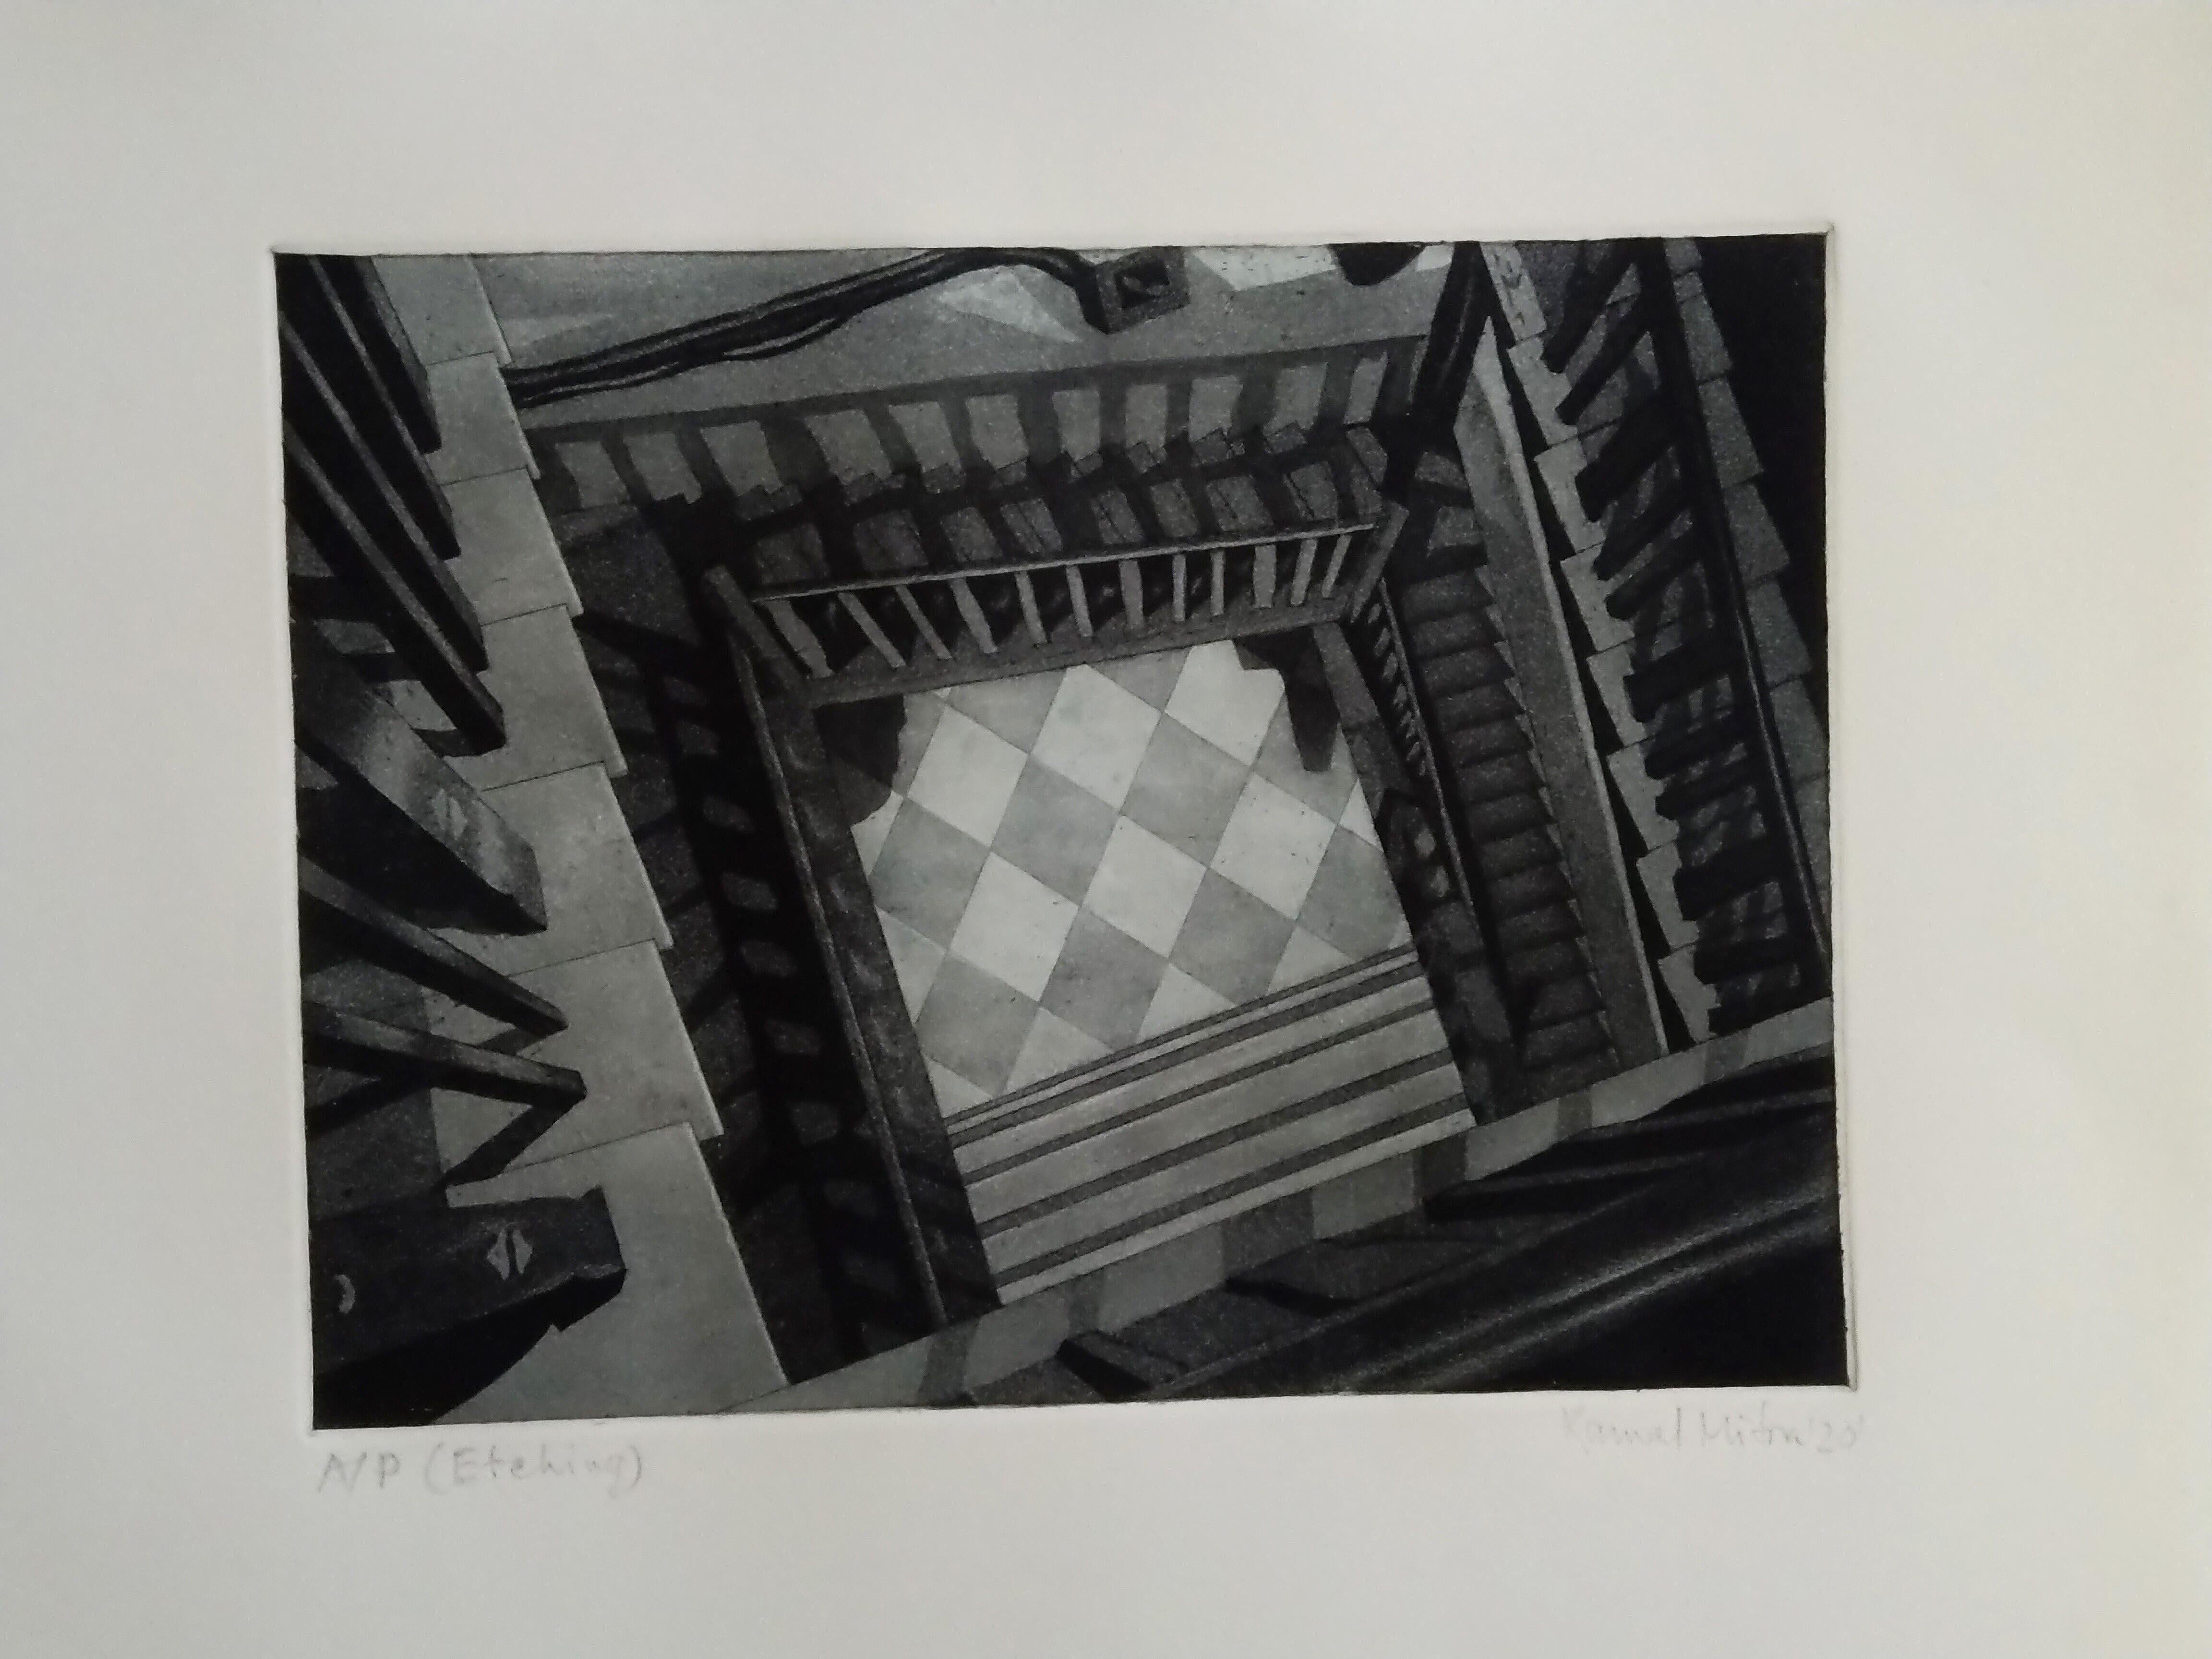 Decorative House, Etching on paper by Indian Contemporary Artist "In Stock"